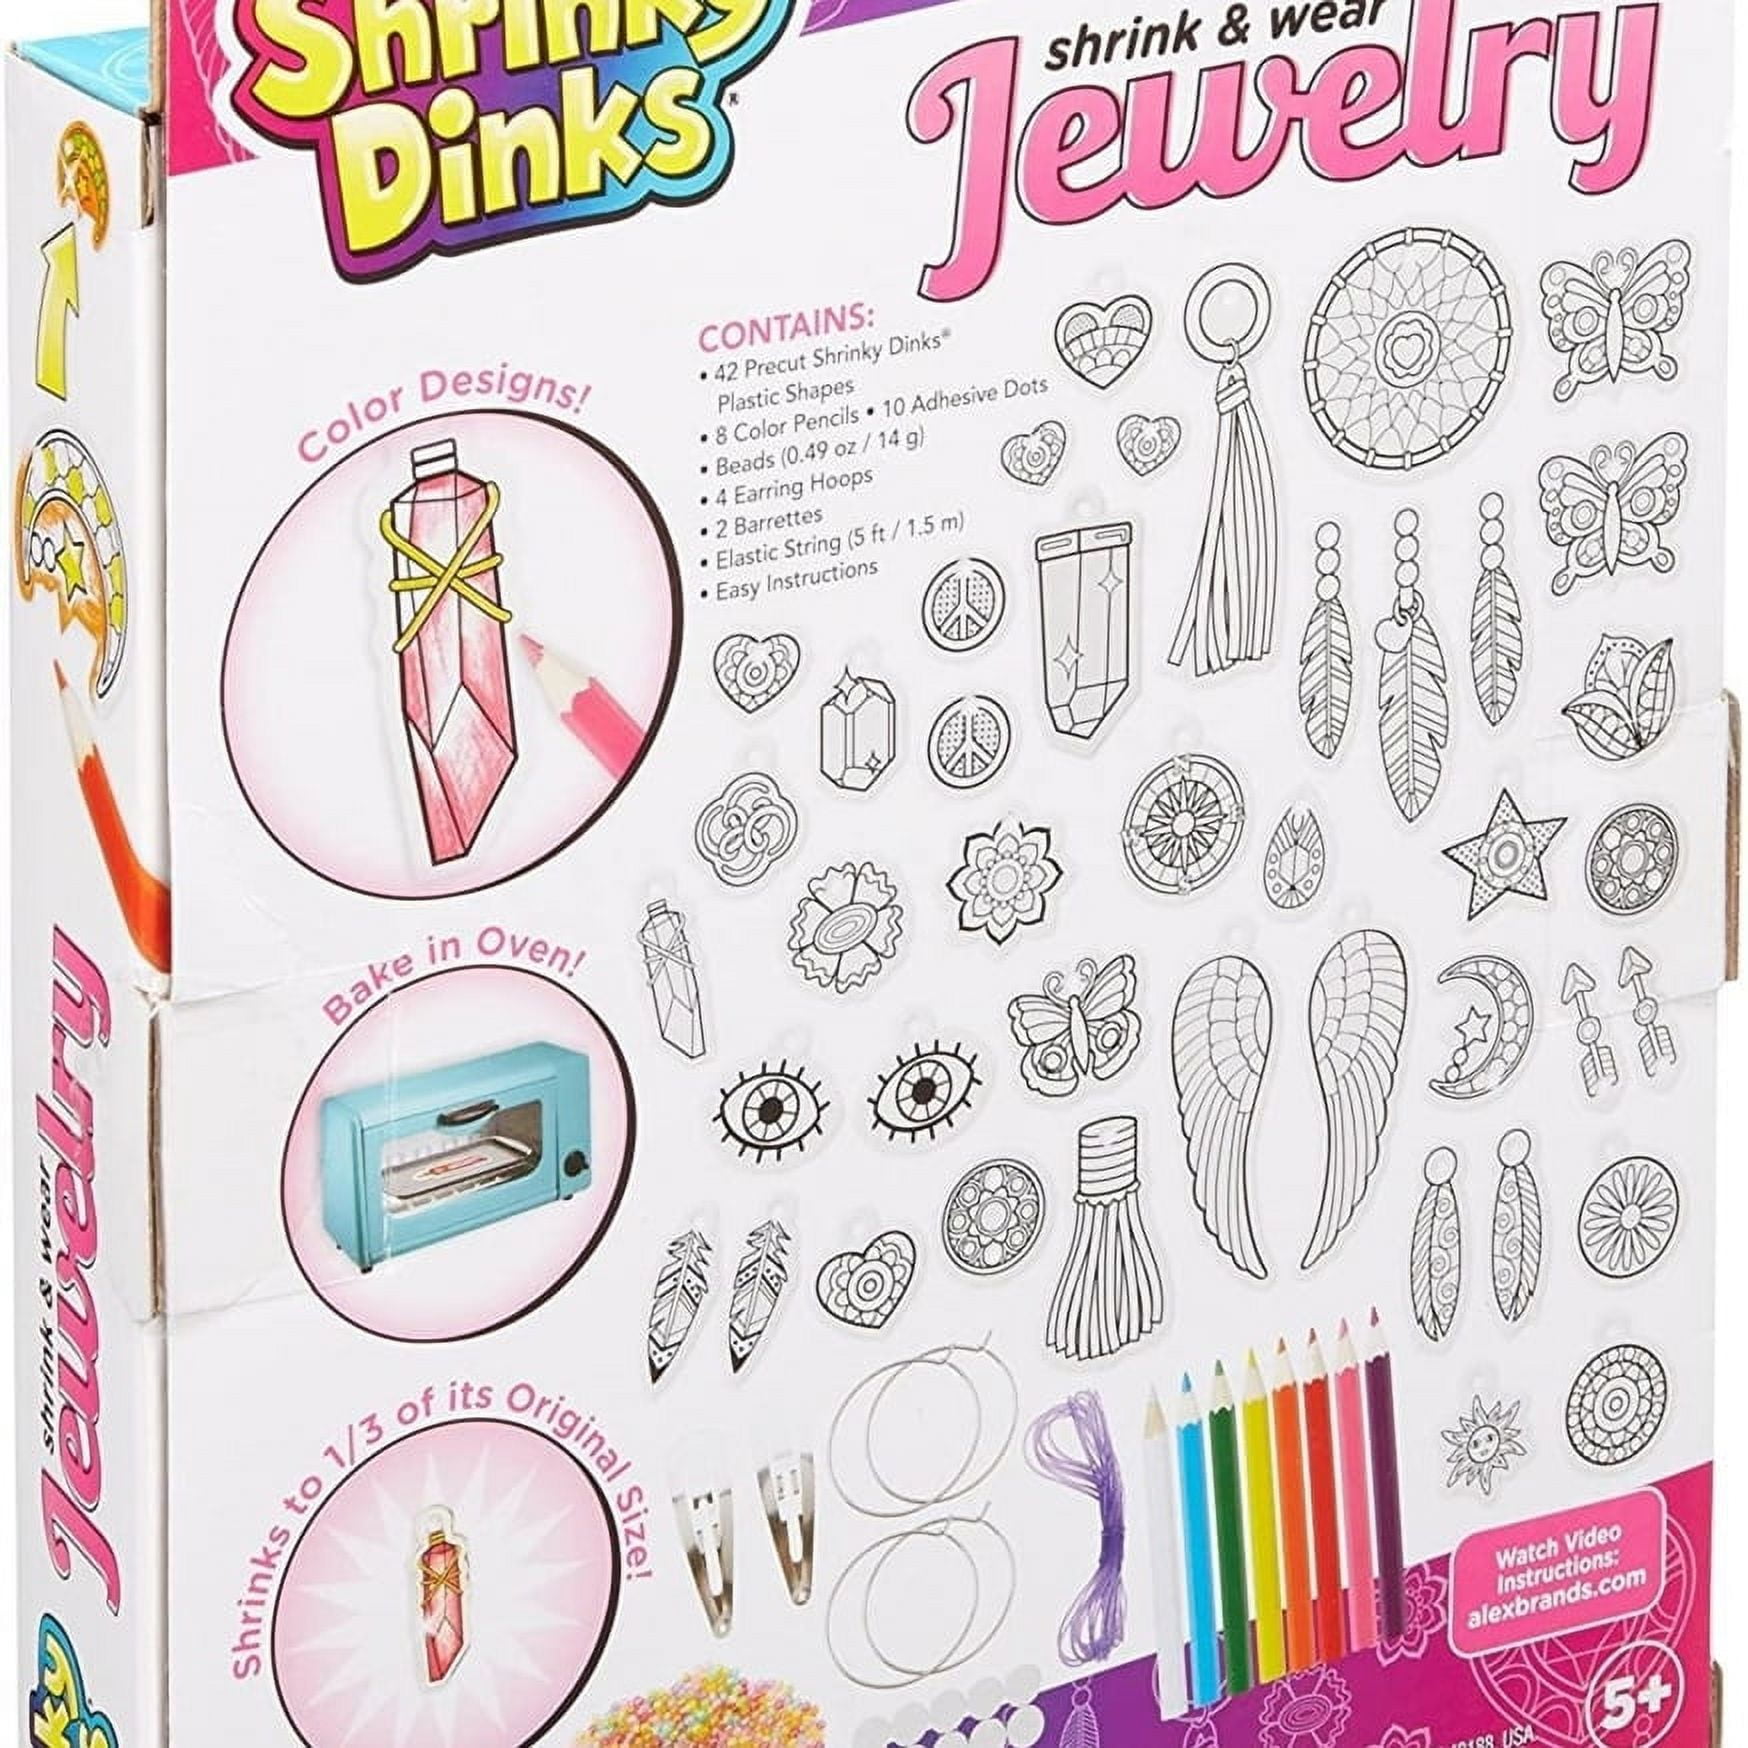 Shrinky Dinks Peace and Love Jewelry Kit - Kremer's Toy And Hobby